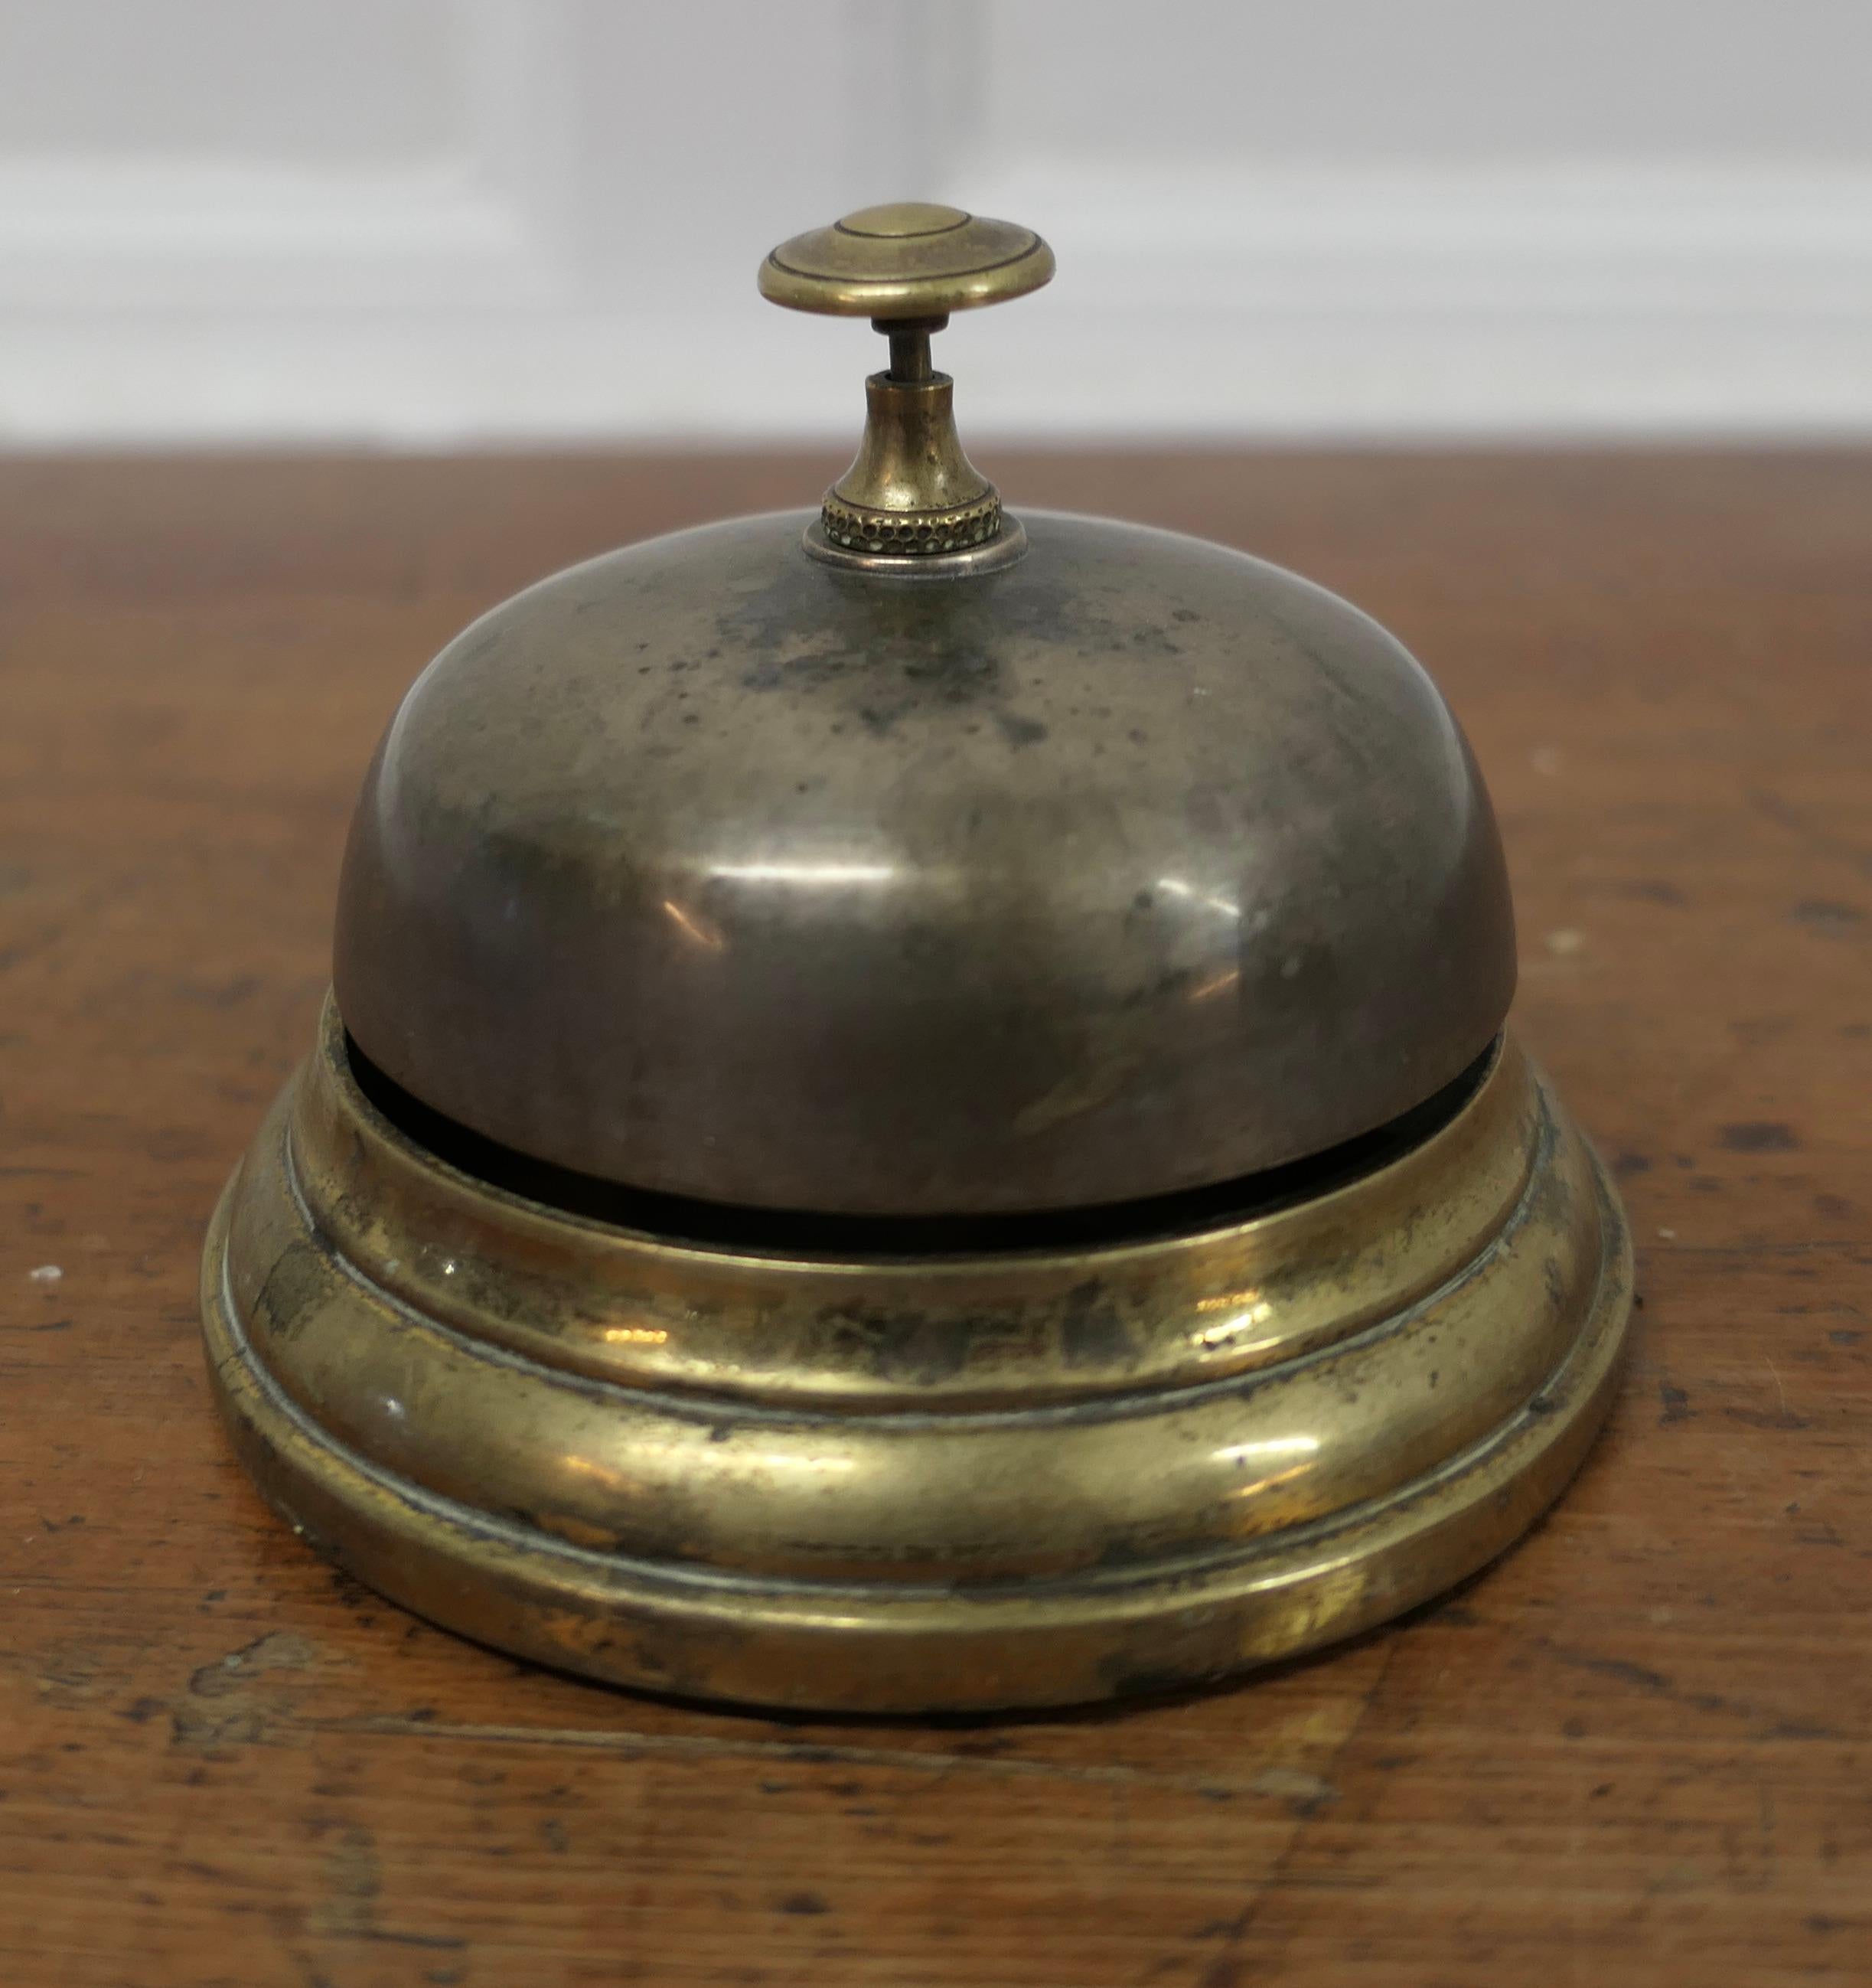  Brass Counter Top Courtesy Bell, Reception Desk Bell

Made in solid brass, in good condition and ready to use with a demanding ding, the bell is 4.5” in diameter and 3” high 
SW22